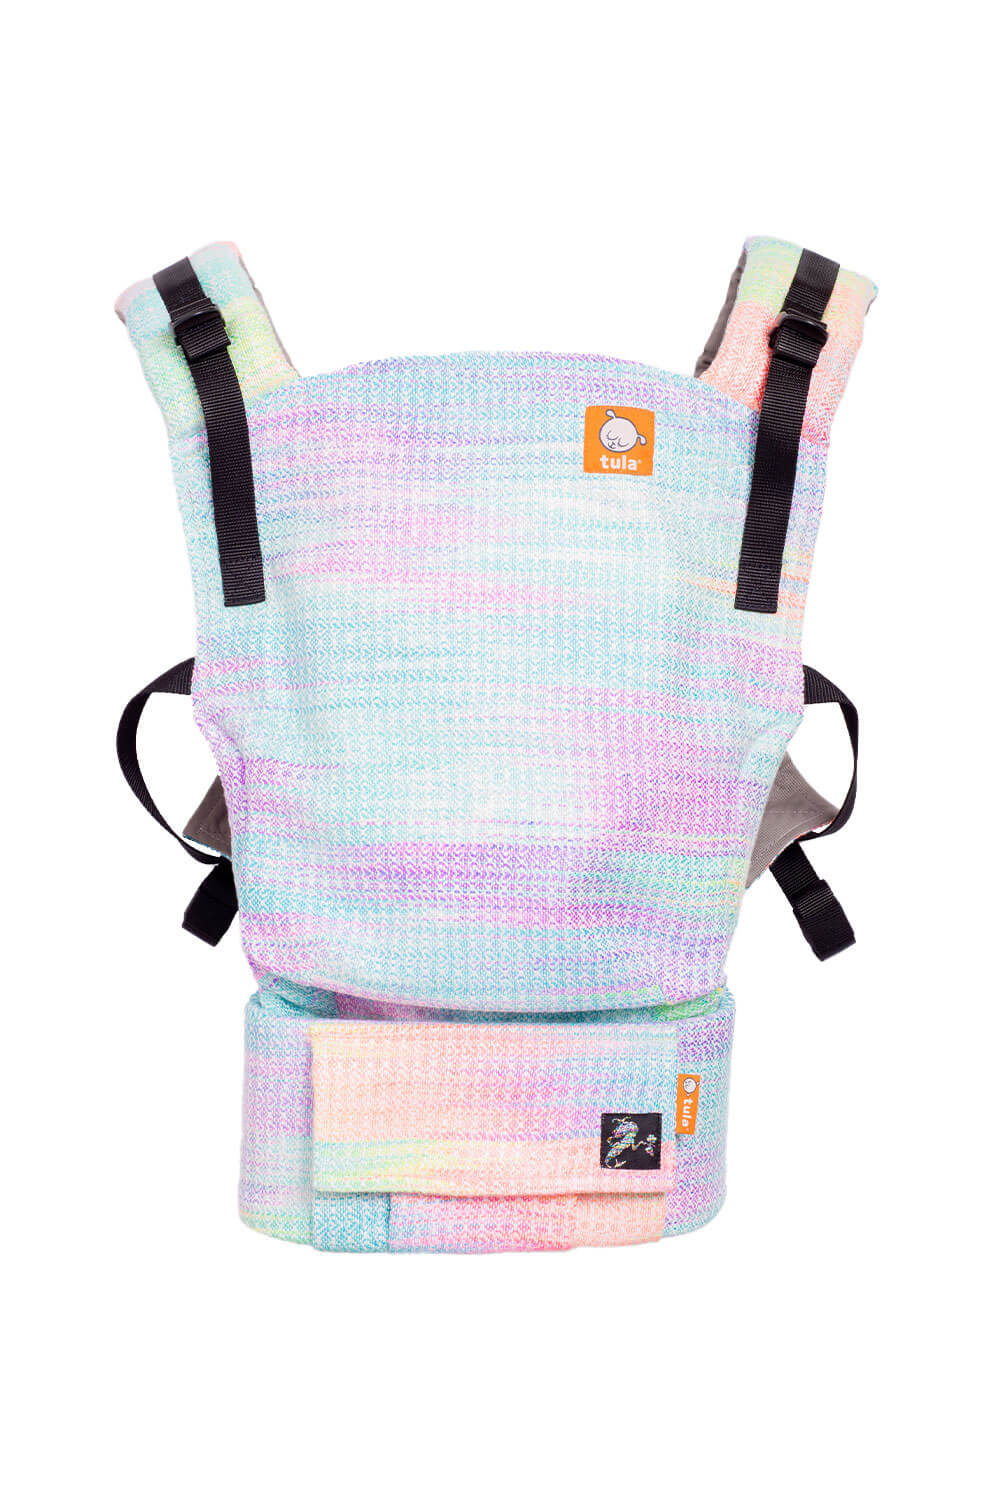 Lulu - Signature Handwoven Free-to-Grow Baby Carrier